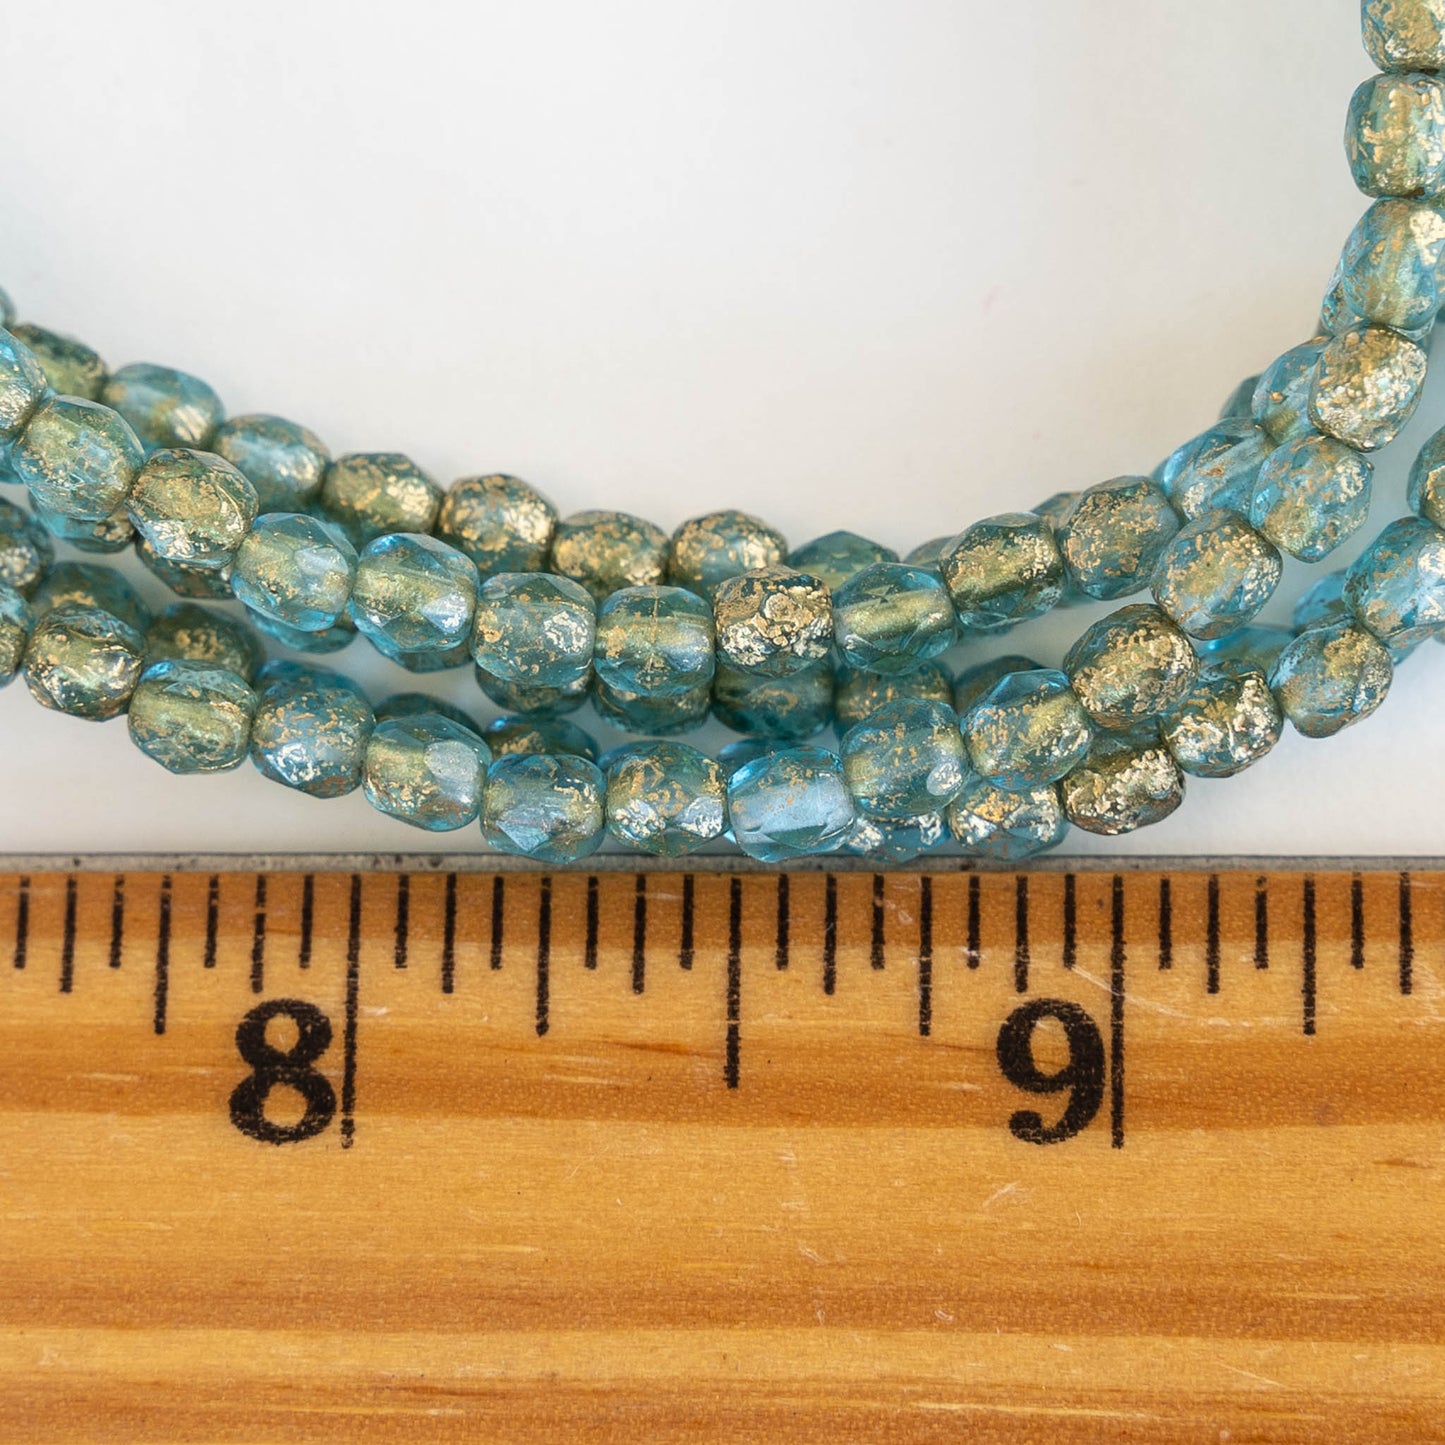 Load image into Gallery viewer, 4mm Round Firepolished Beads - Etched Aqua with Gold Dust - 50 Beads
